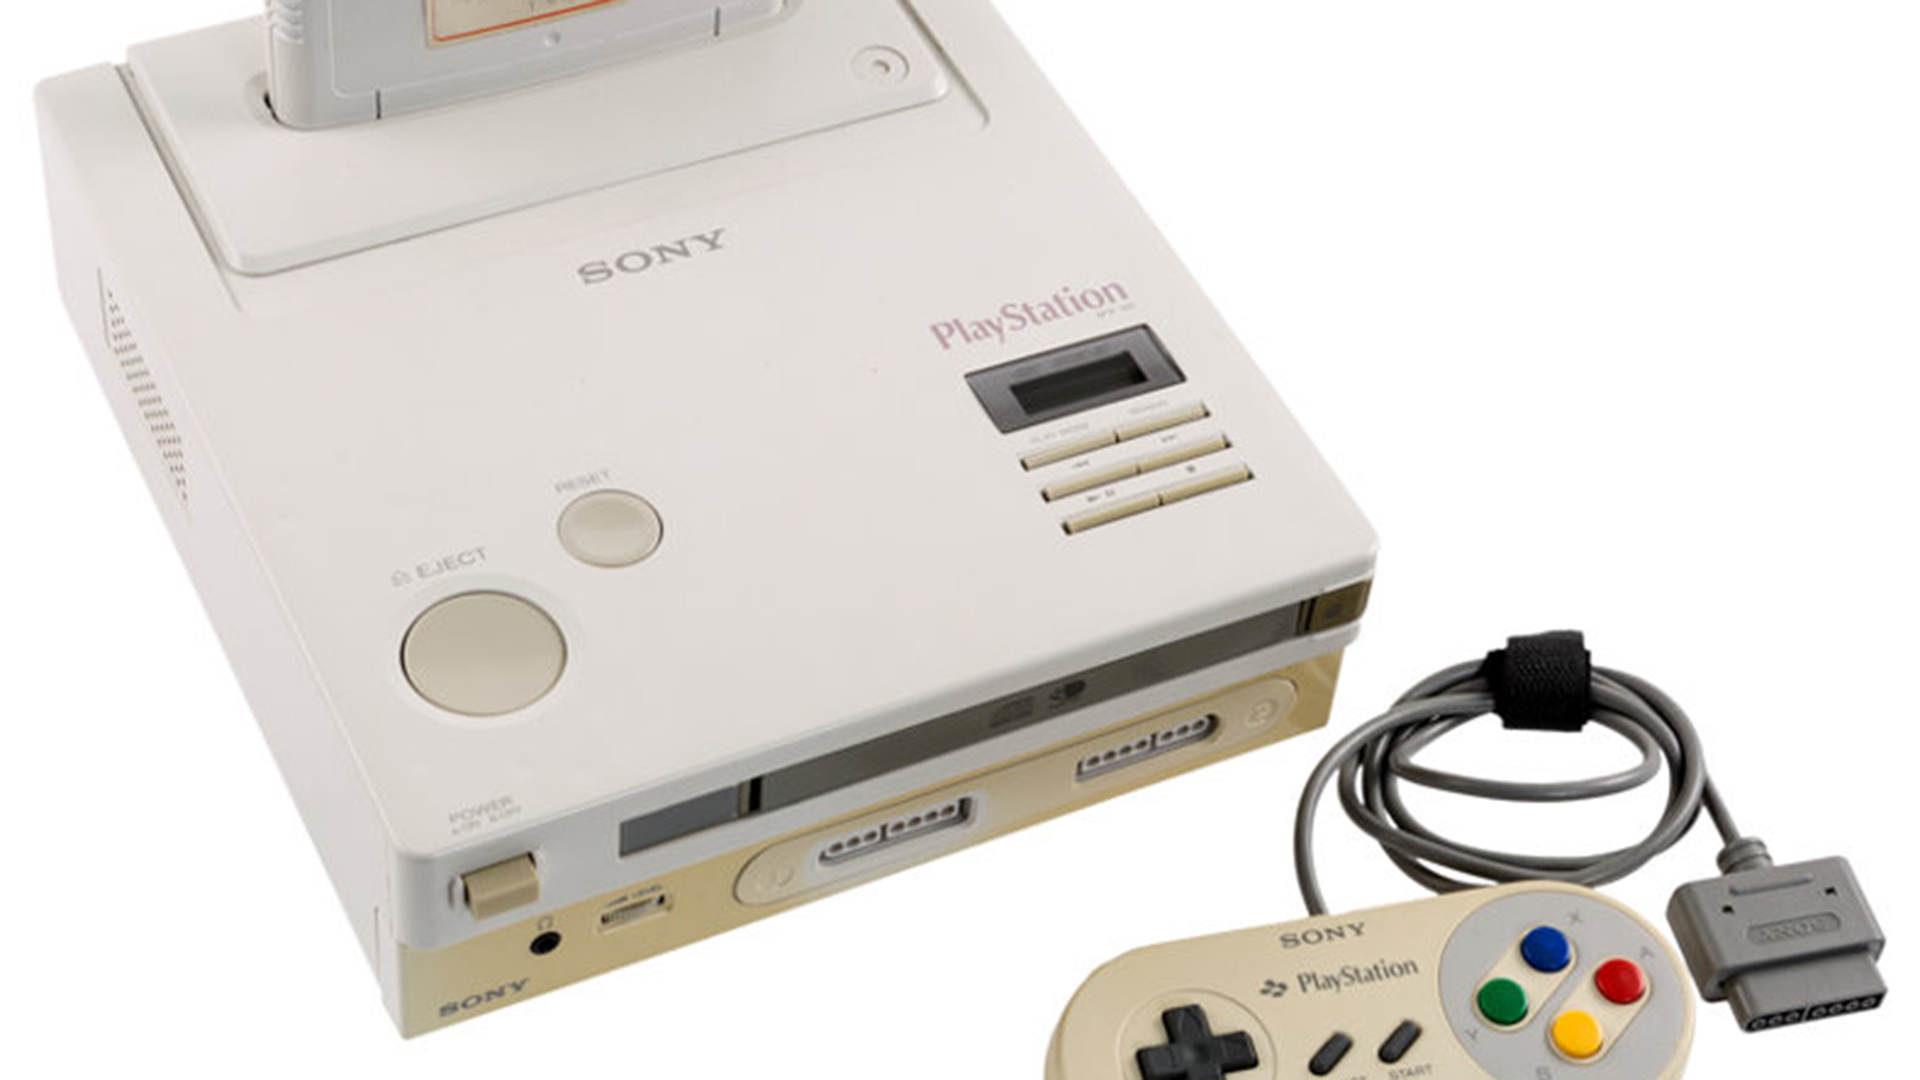 The world's only Nintendo Playstation console is up for auction 